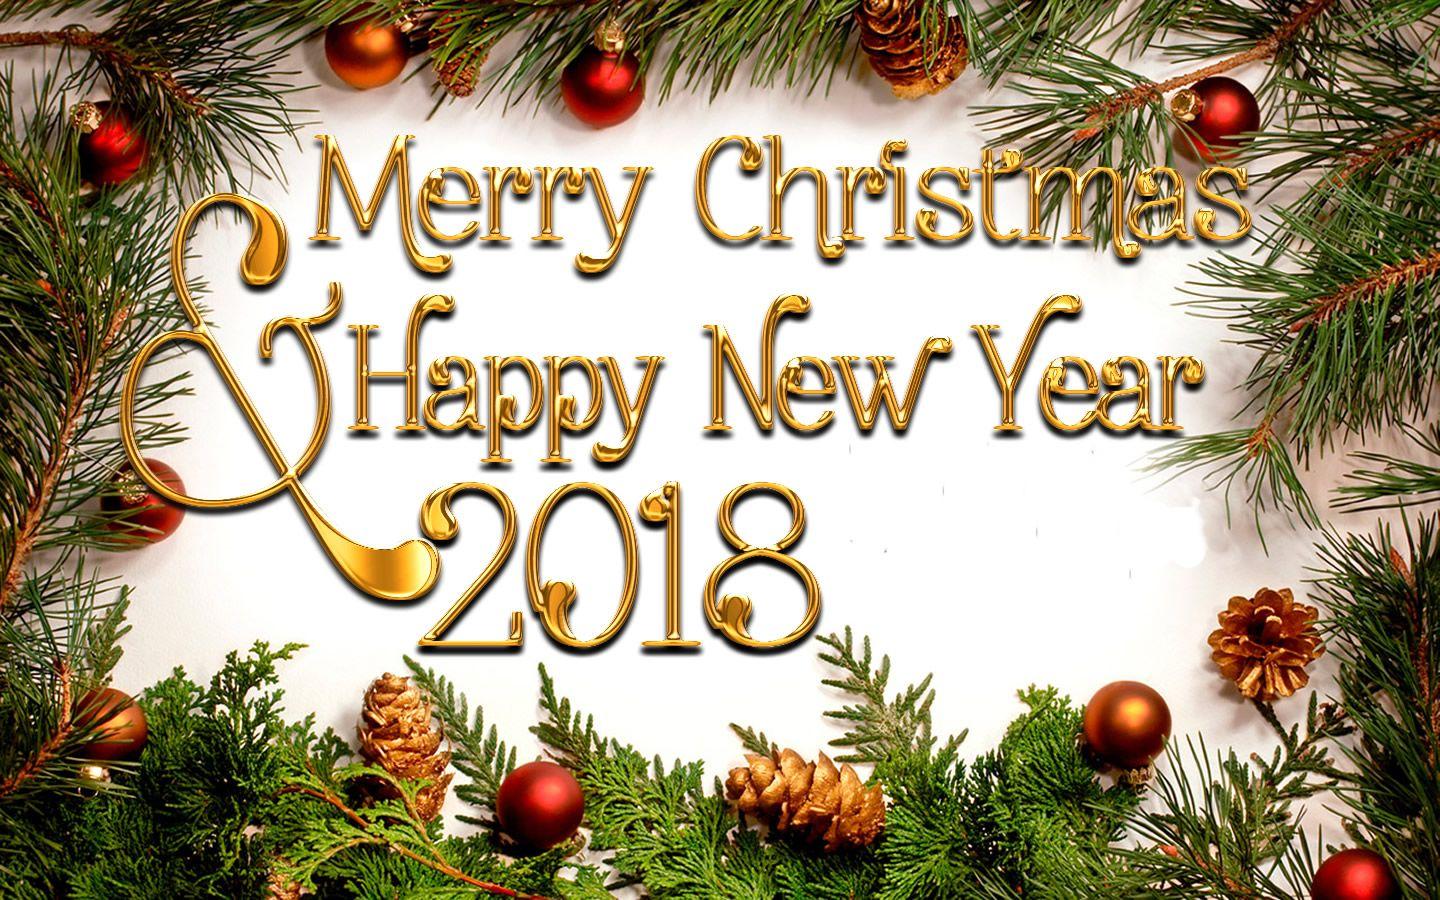 Merry Christmas And Happy New Year 2018 with decoration image